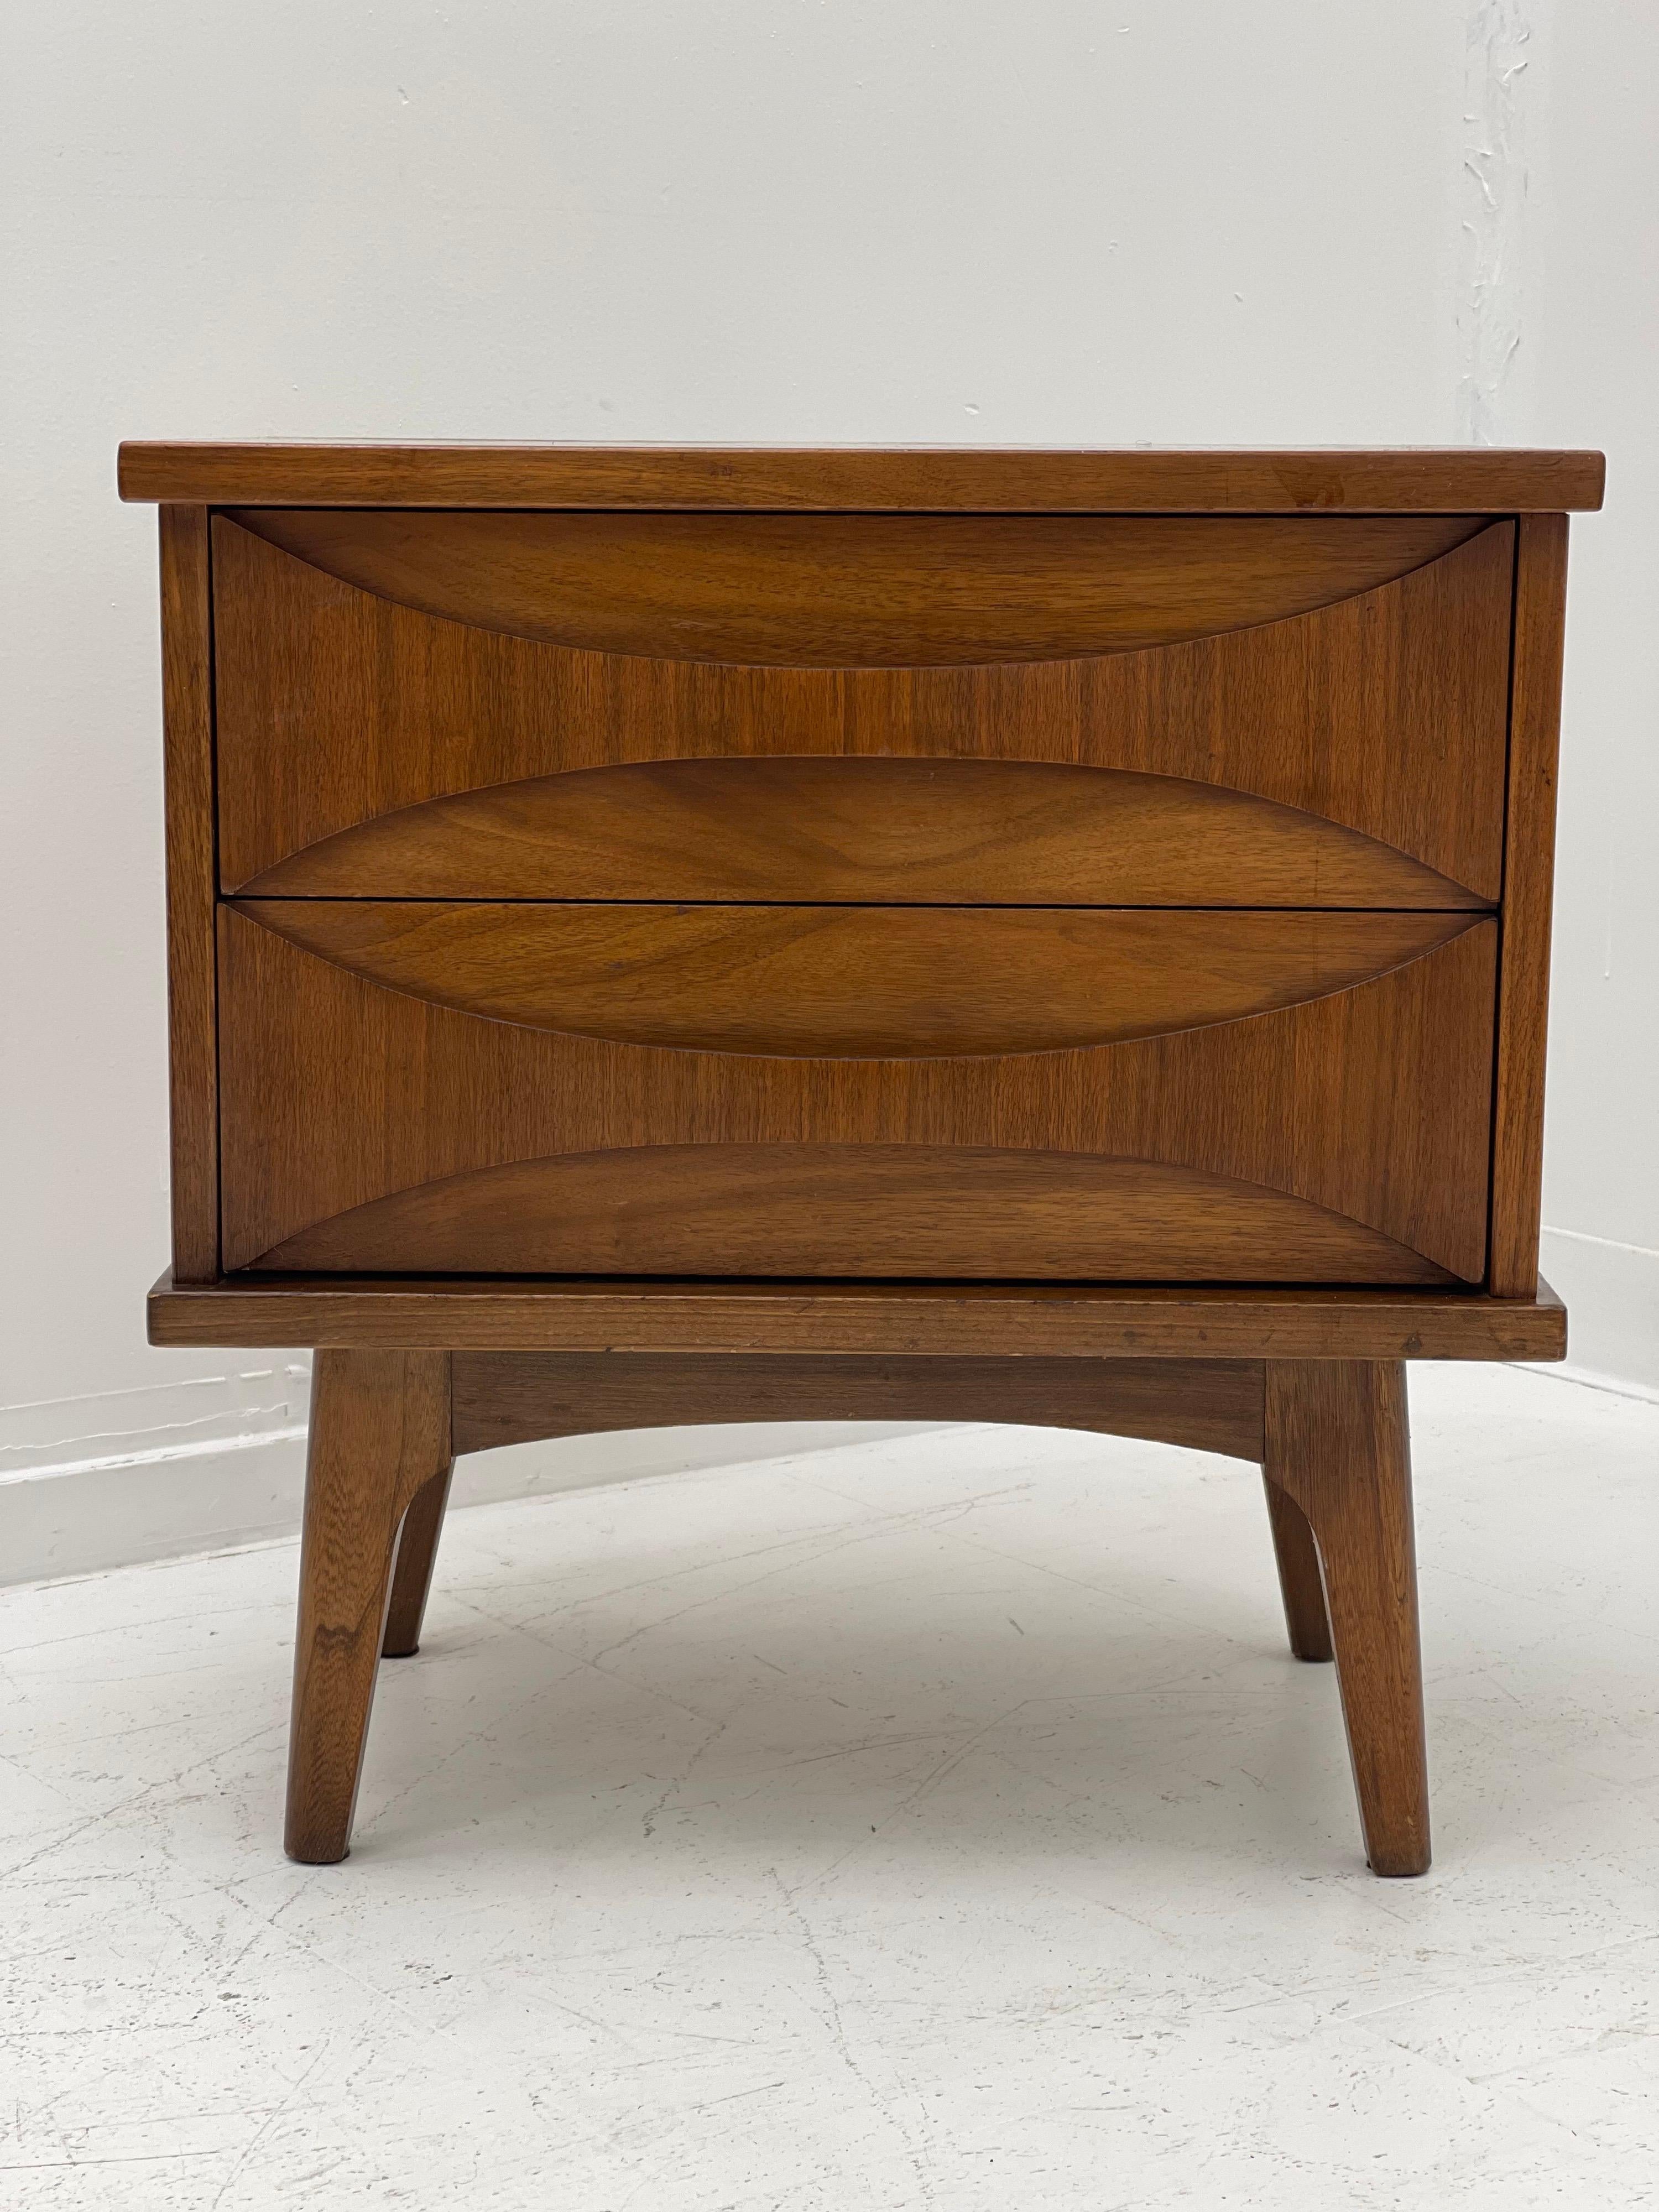 Unique mid-century night stand with walnut construction, including sculpted drawer fronts, tapered legs and plenty of stylish storage. 

Measures: 24 W, 16 D, 24.5 H.